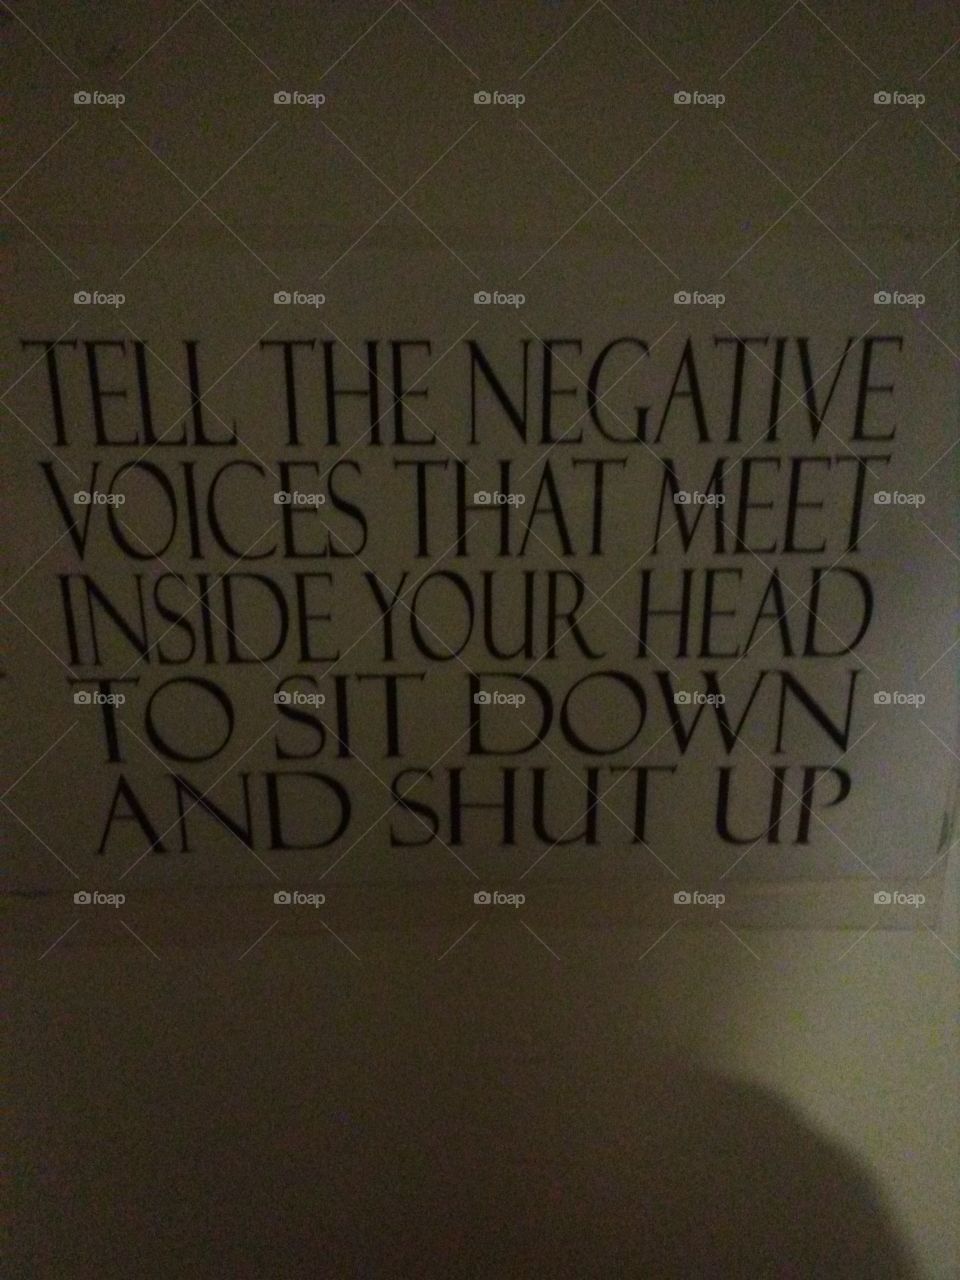 Voice's and negative thoughts.